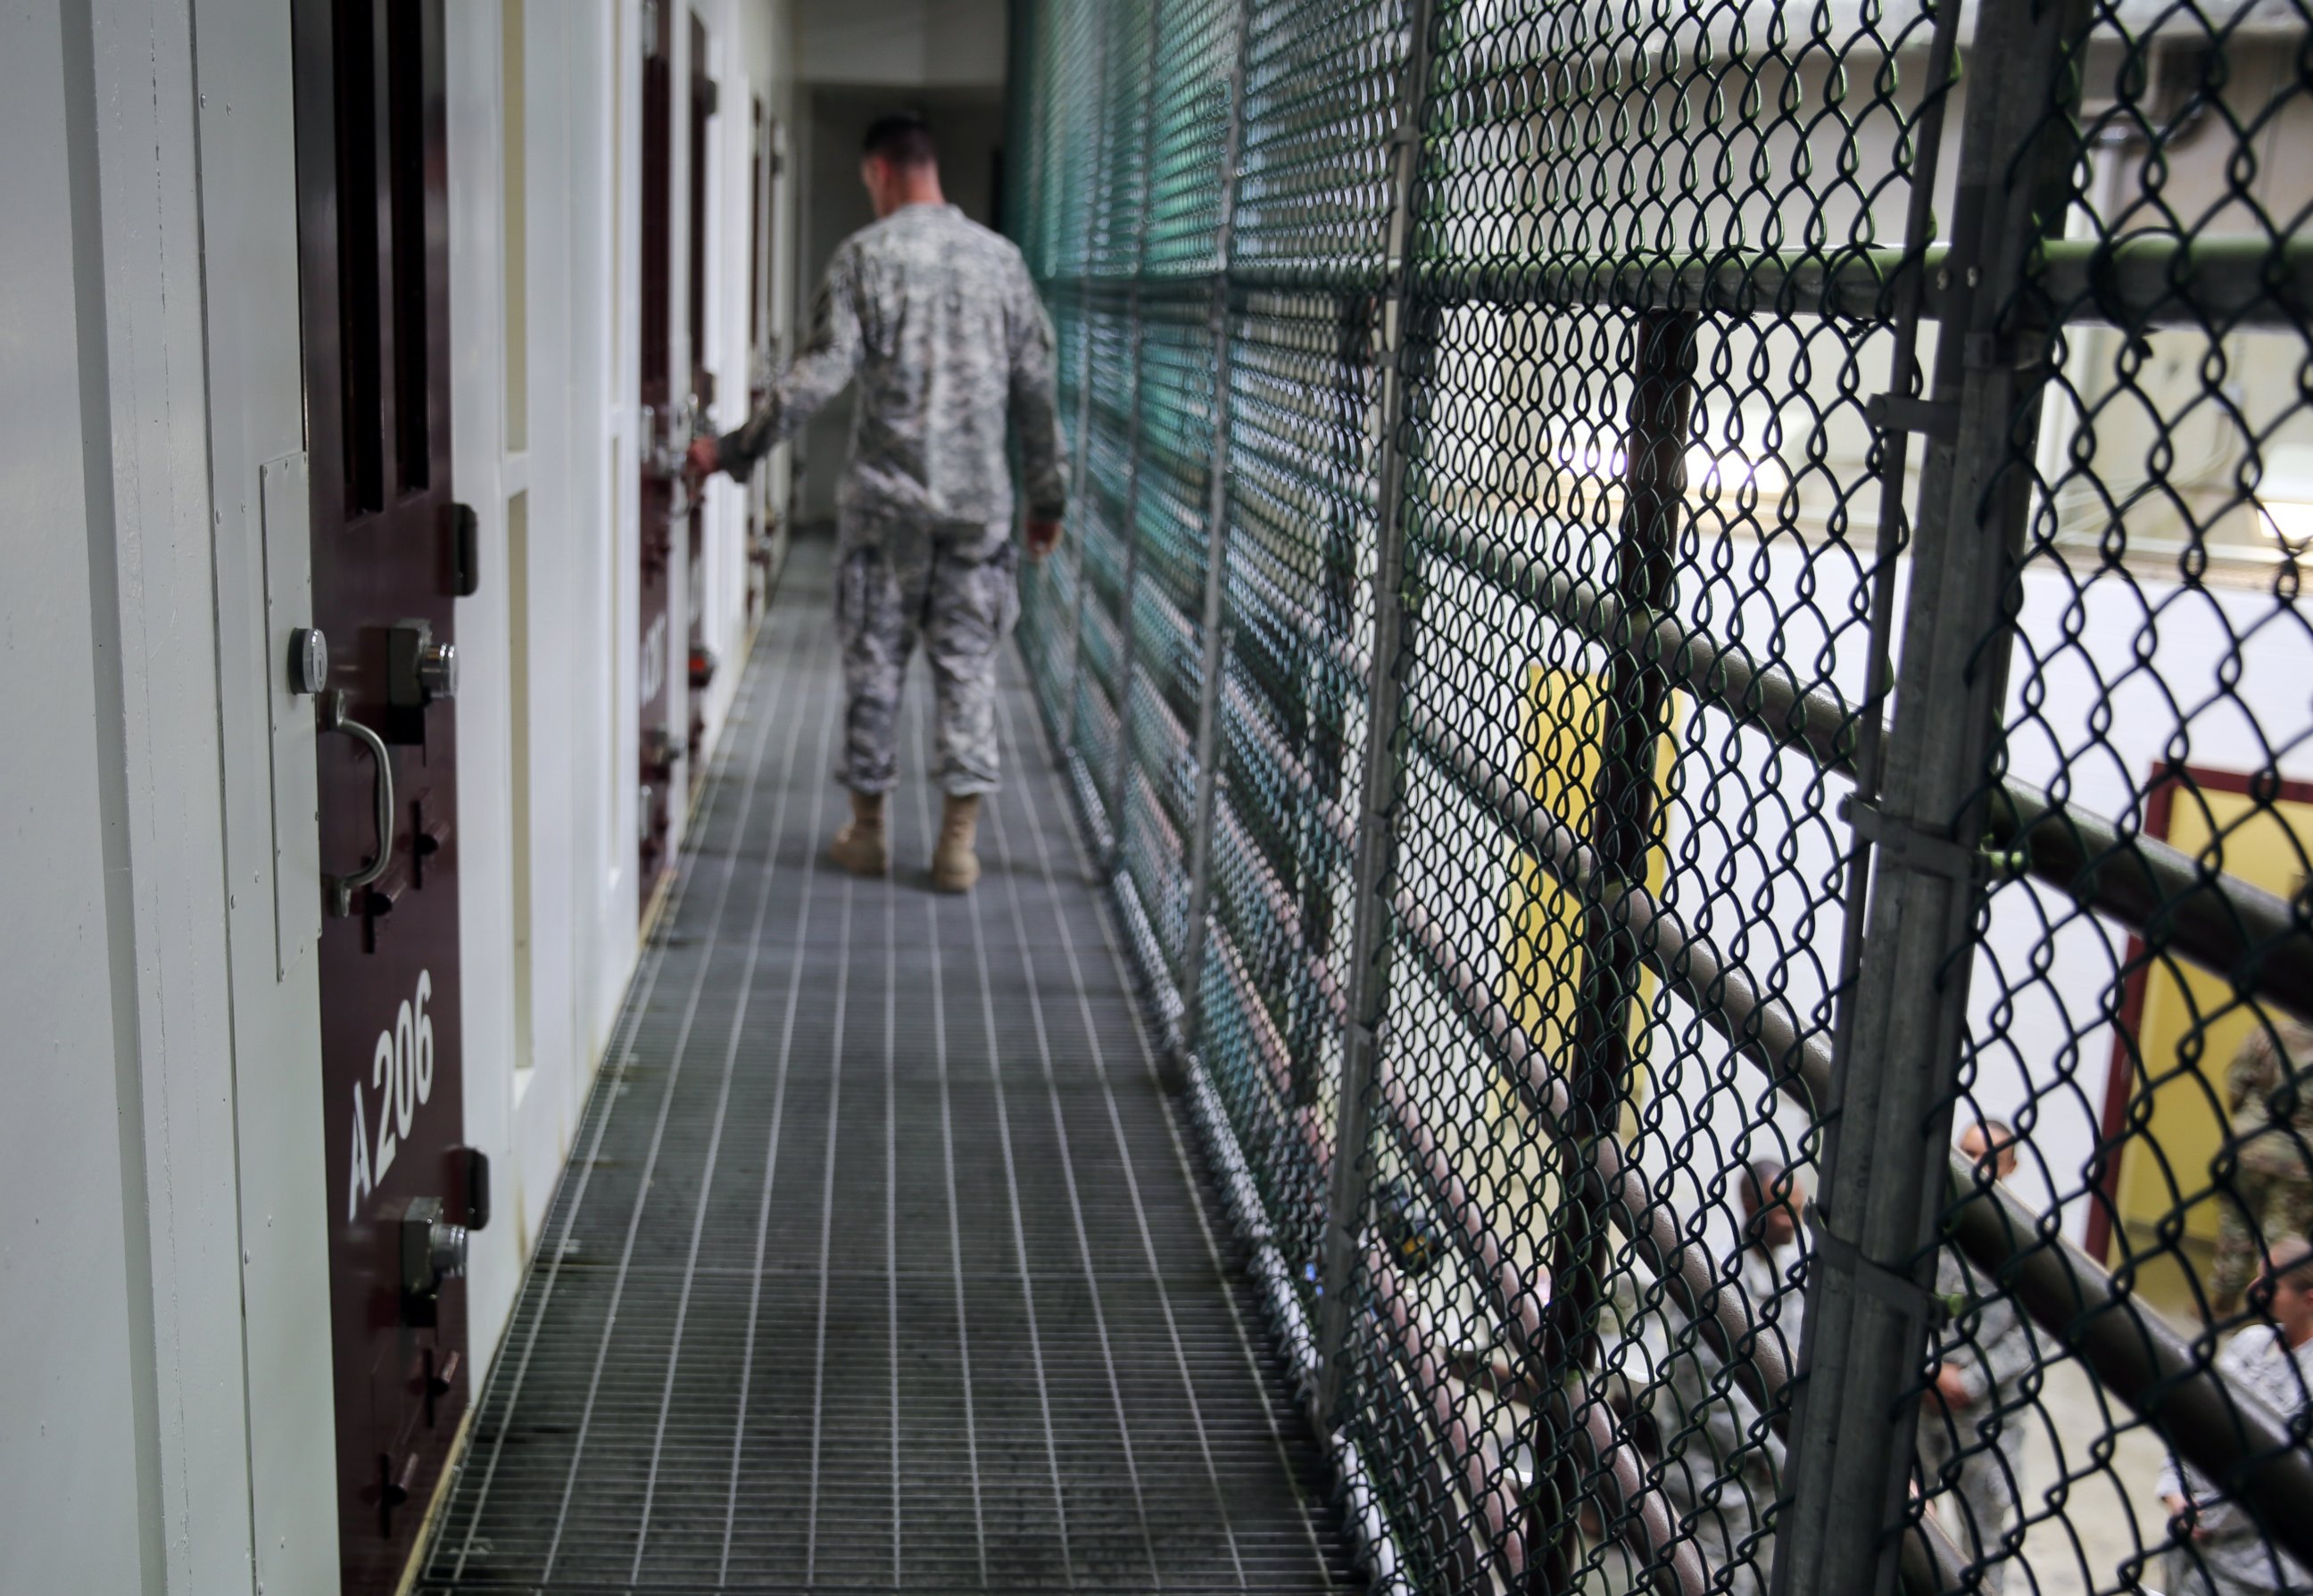 PHOTO: An Army captain walks outside unoccupied detainee cells inside Camp 6 at the U.S. detention center at Guantanamo Bay, Cuba, February 6, 2016. 